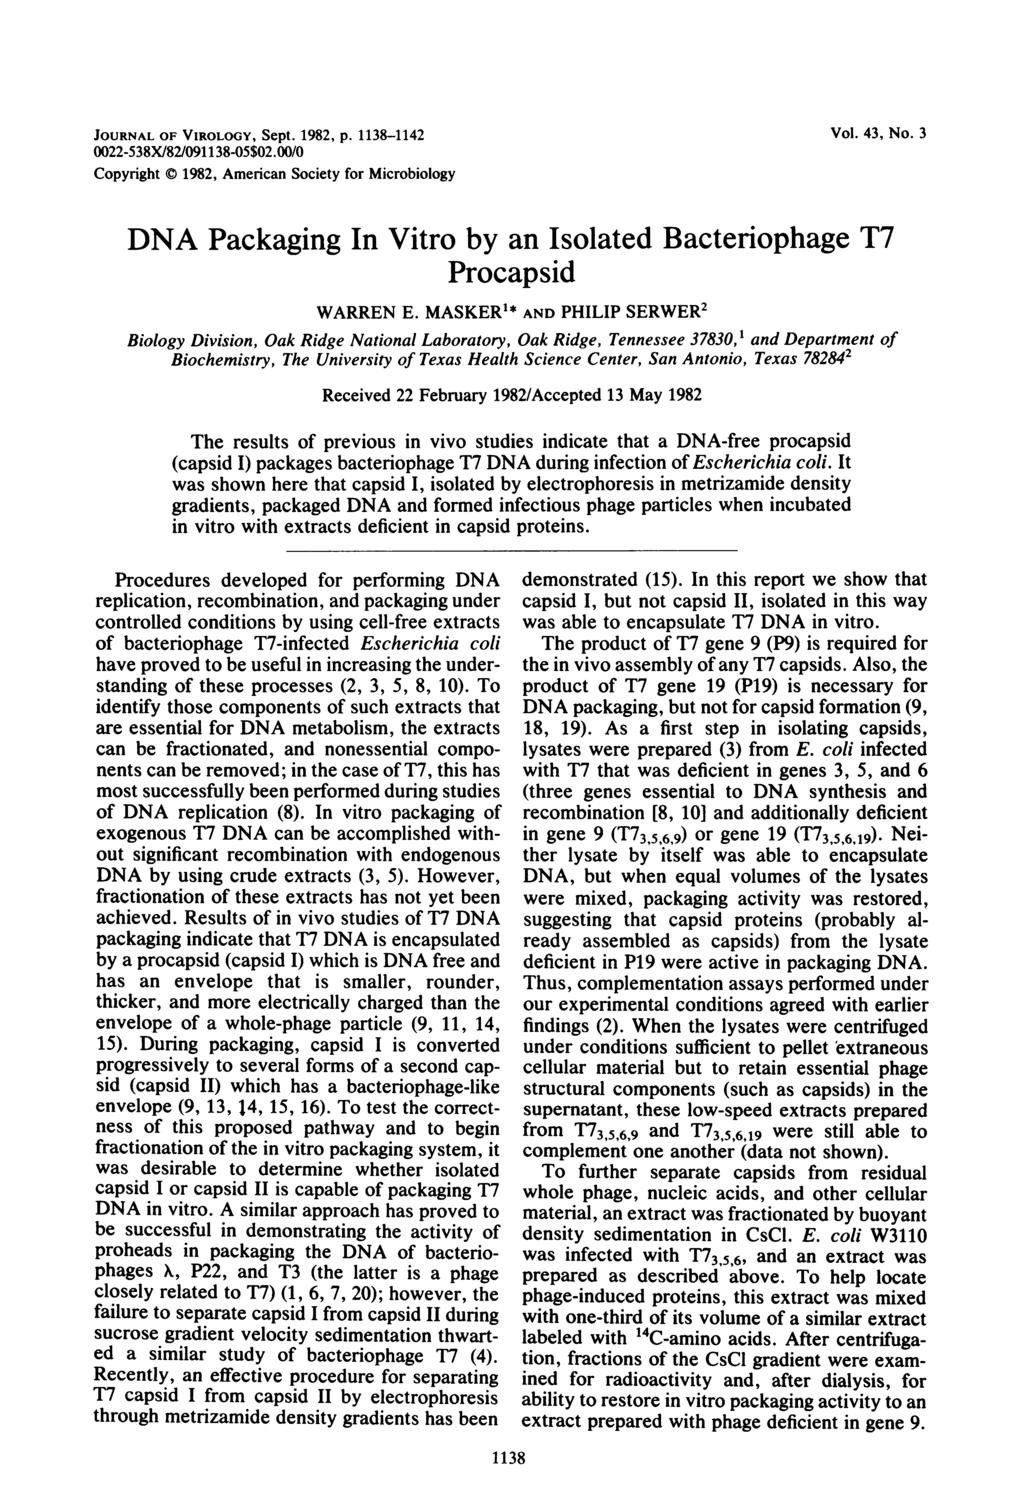 JOURNAL OF VIROLOGY, Sept. 1982, p. 1138-1142 22-538X/82/91138-5$2./ Copyright C 1982, American Society for Microbiology Vol. 43, No.